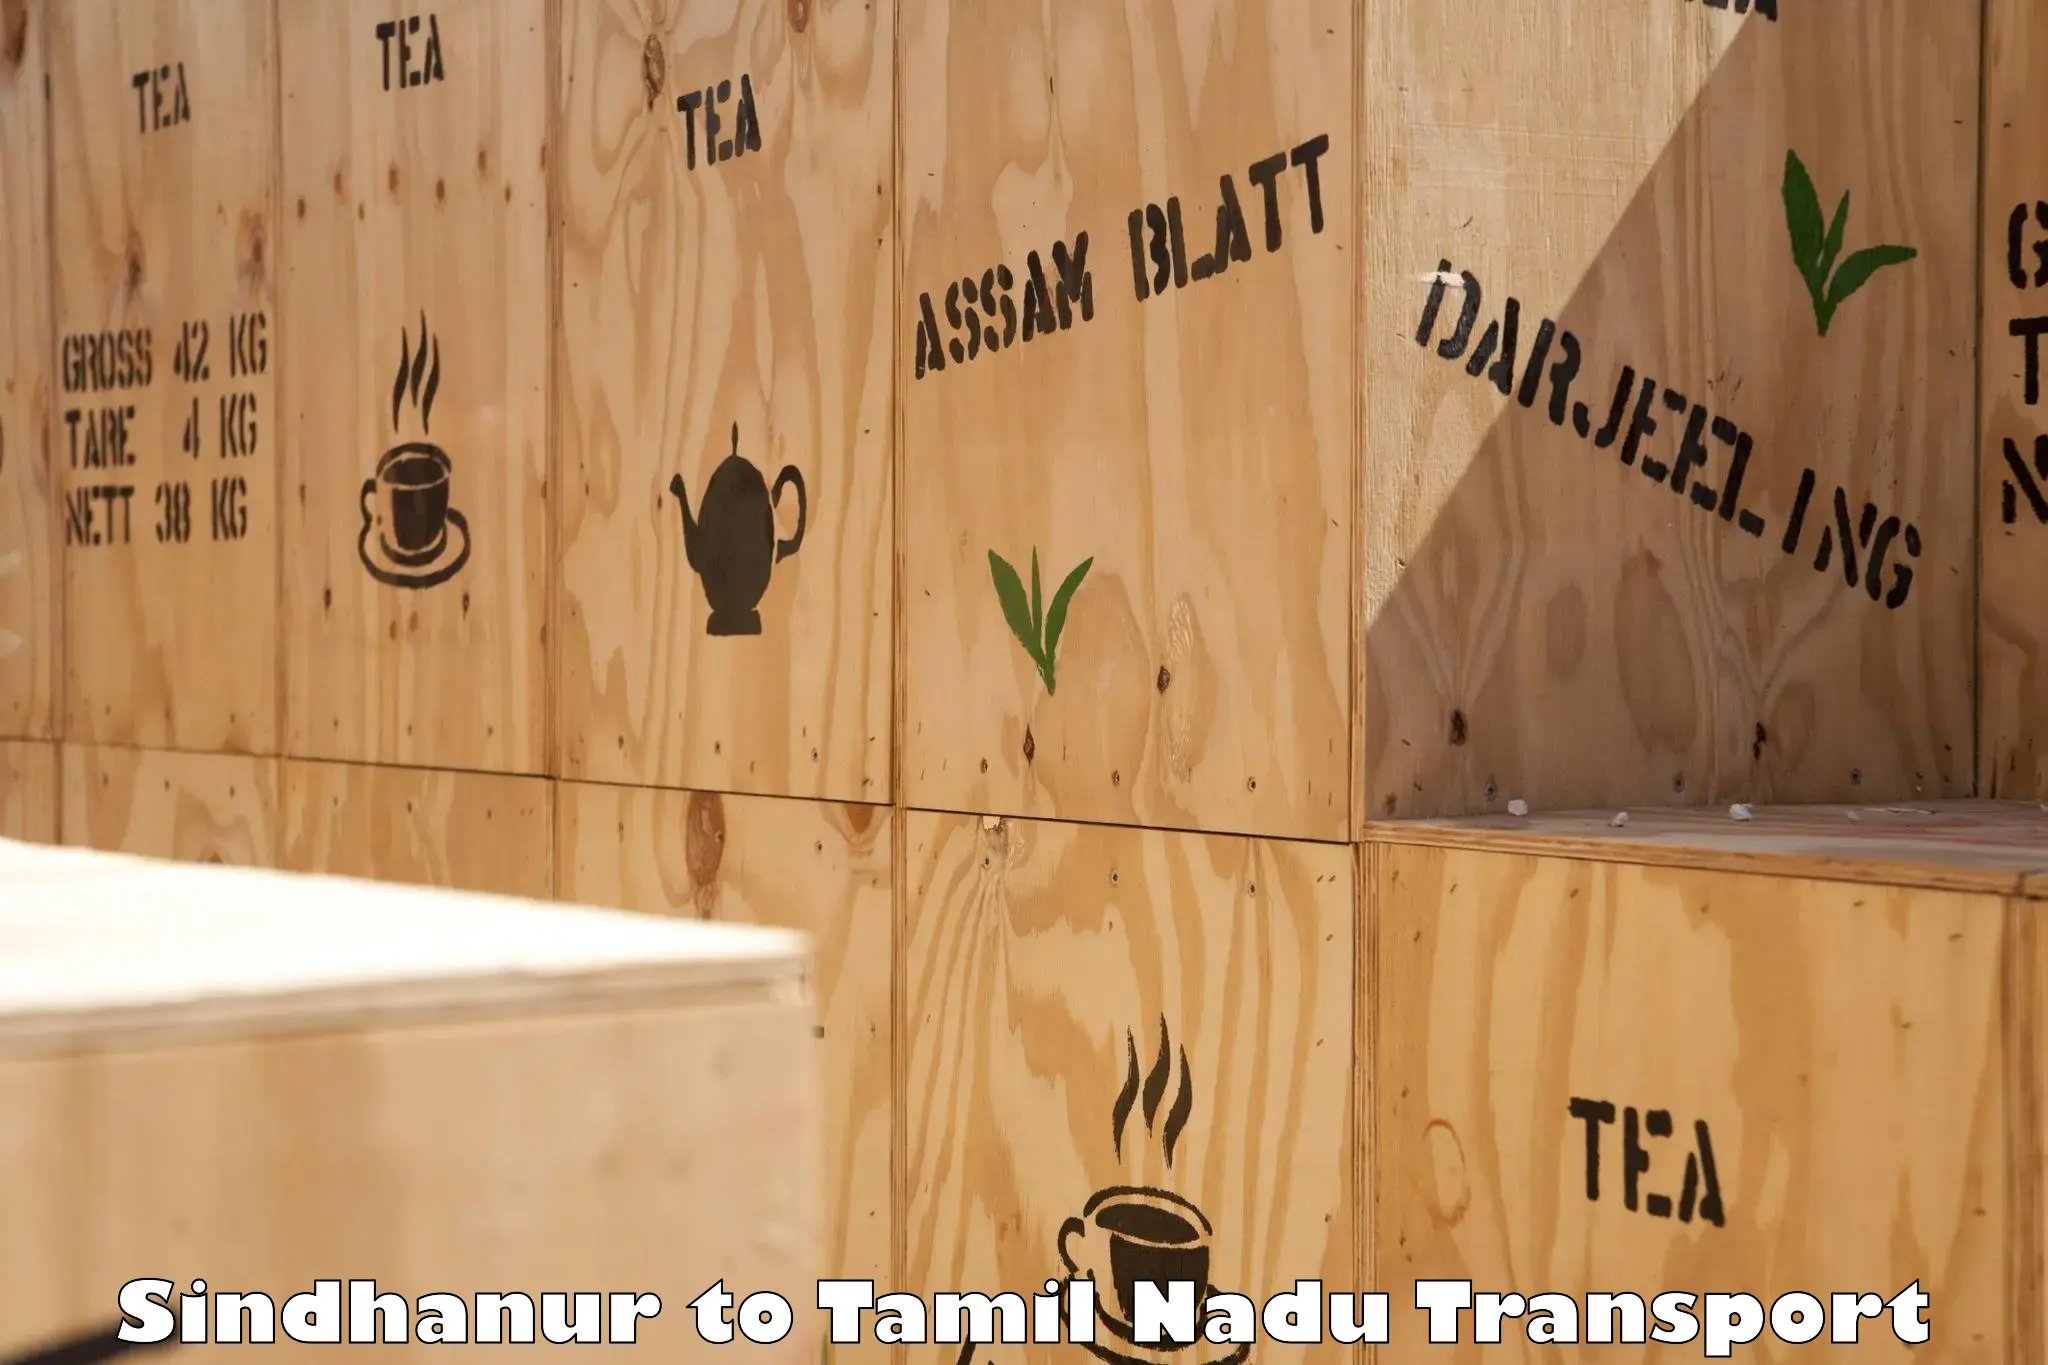 Furniture transport service Sindhanur to Shanmugha Arts Science Technology and Research Academy Thanjavur